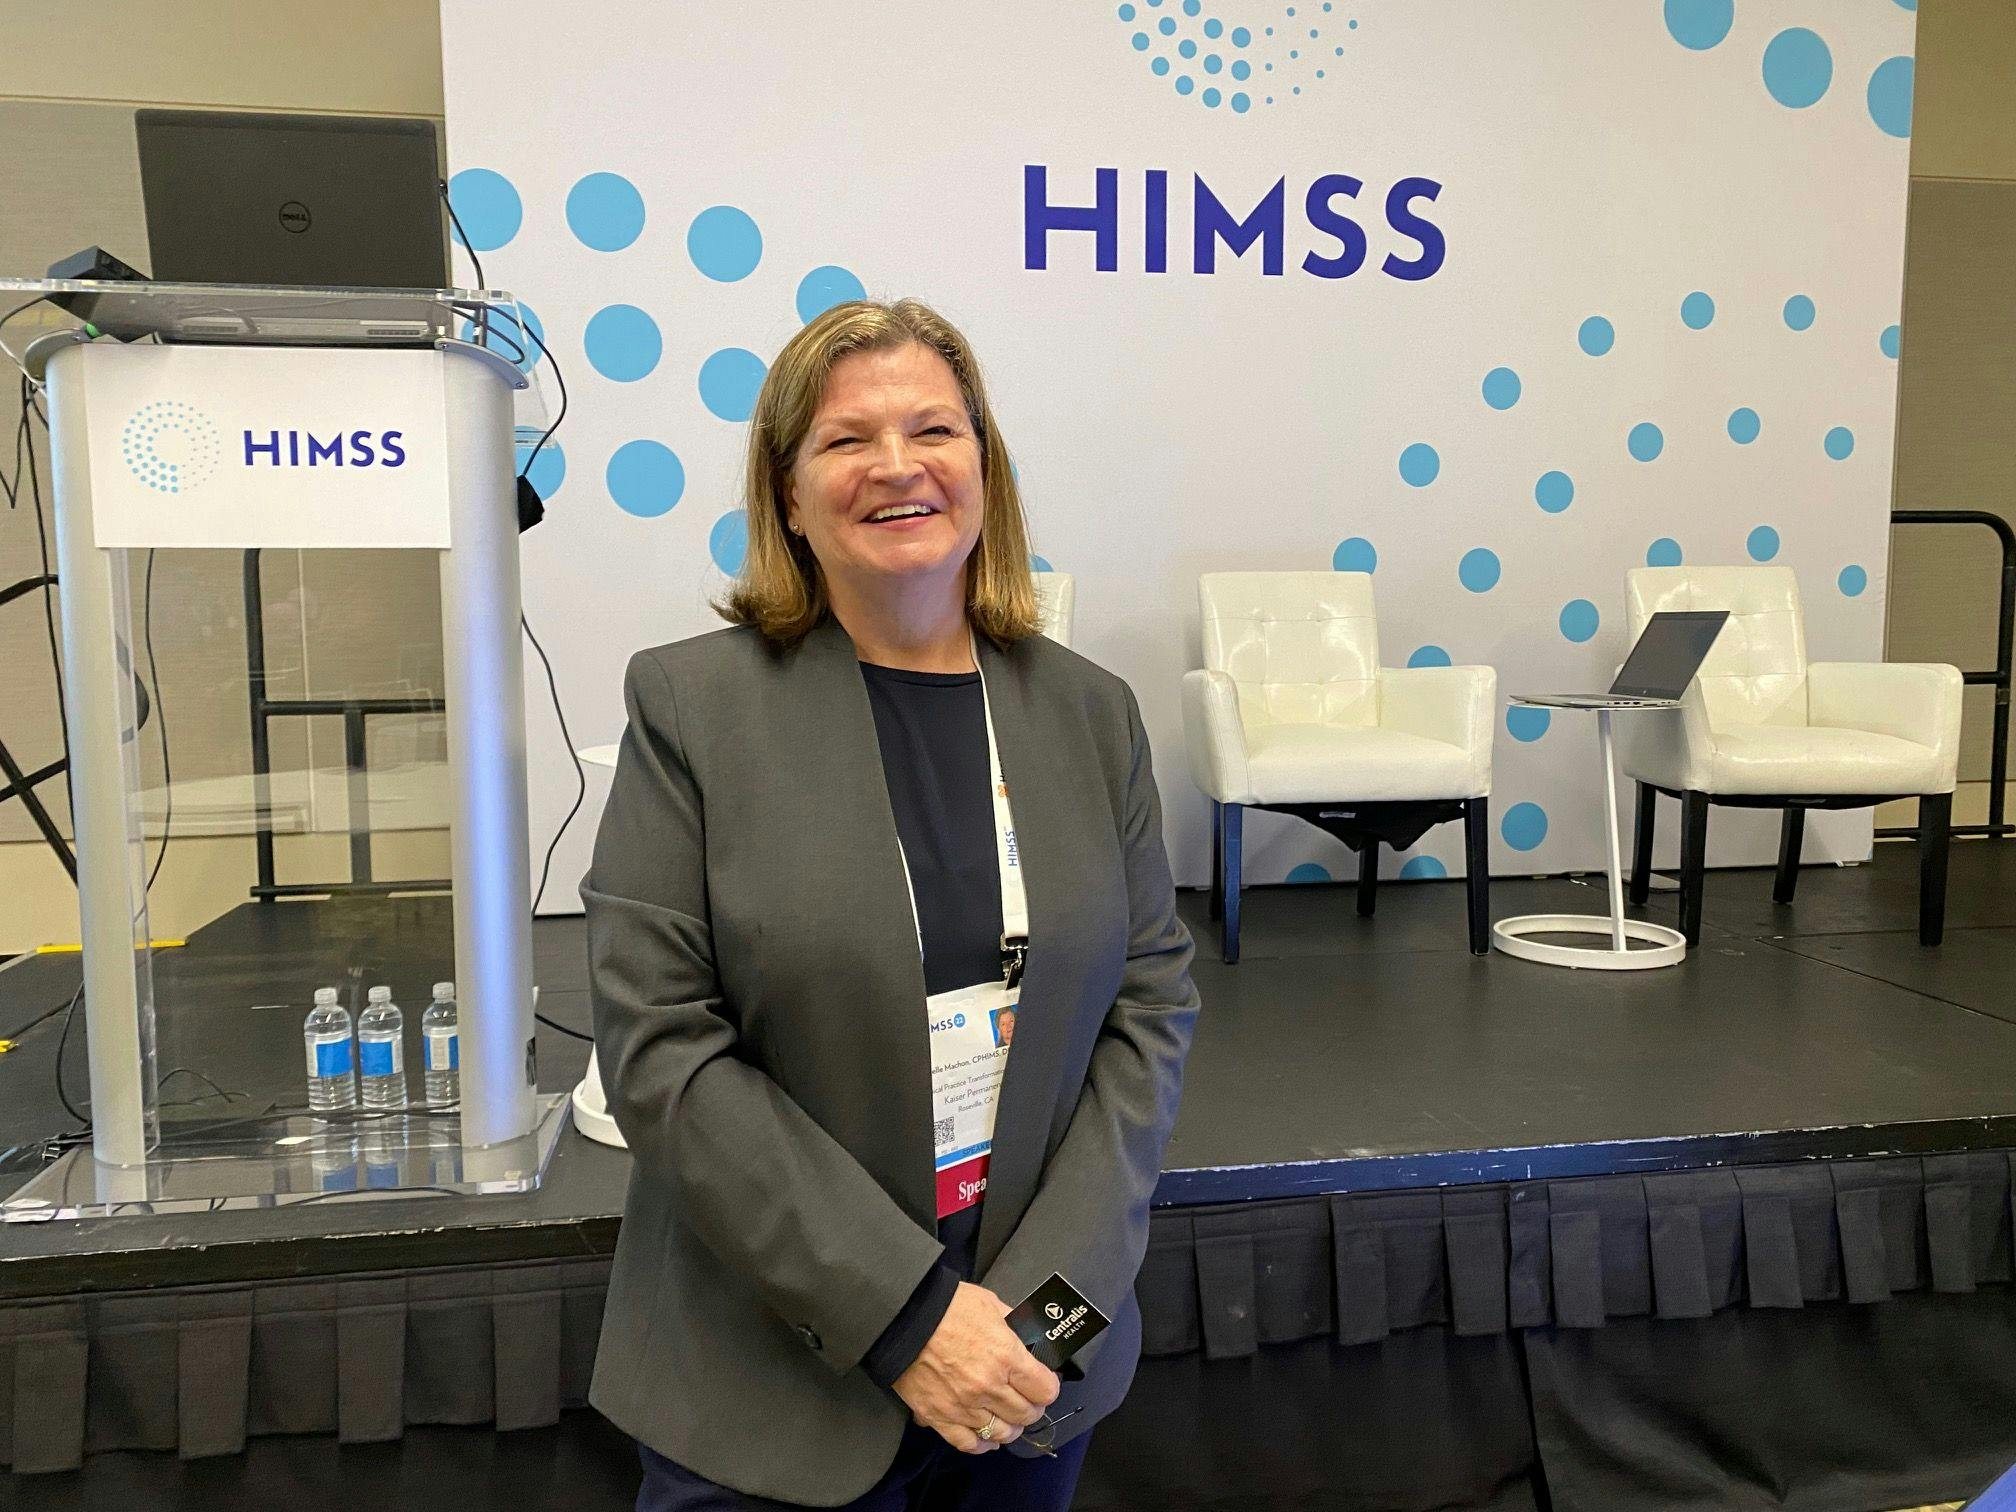 Michelle Machon, director of clinical education, practice and informatics at Kaiser Permanente, spoke about lessons from the pandemic at the HIMSS 2022 Conference.